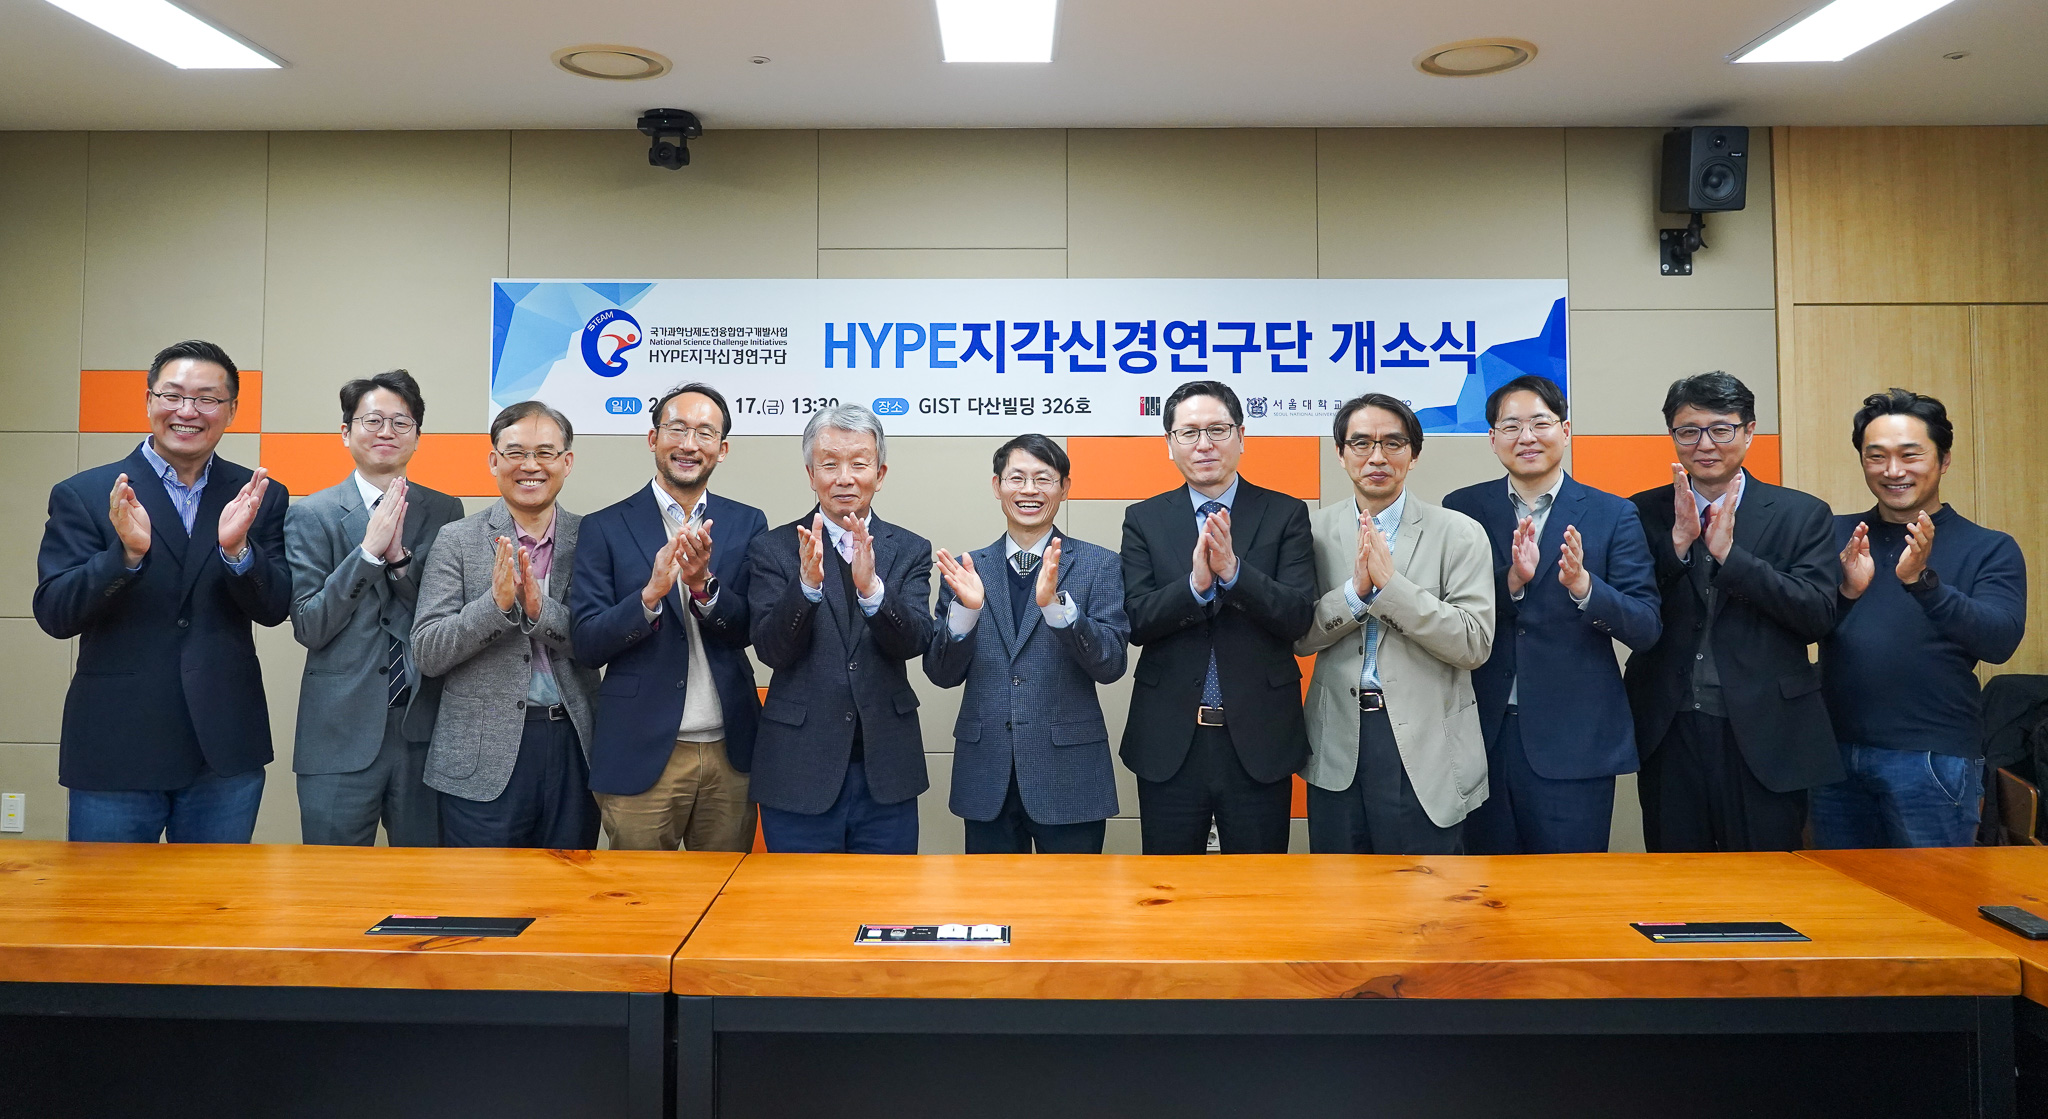 GIST opens 'HYPE Perception Neuroscience Research Center'... To develop treatment for incurable neurological diseases 이미지